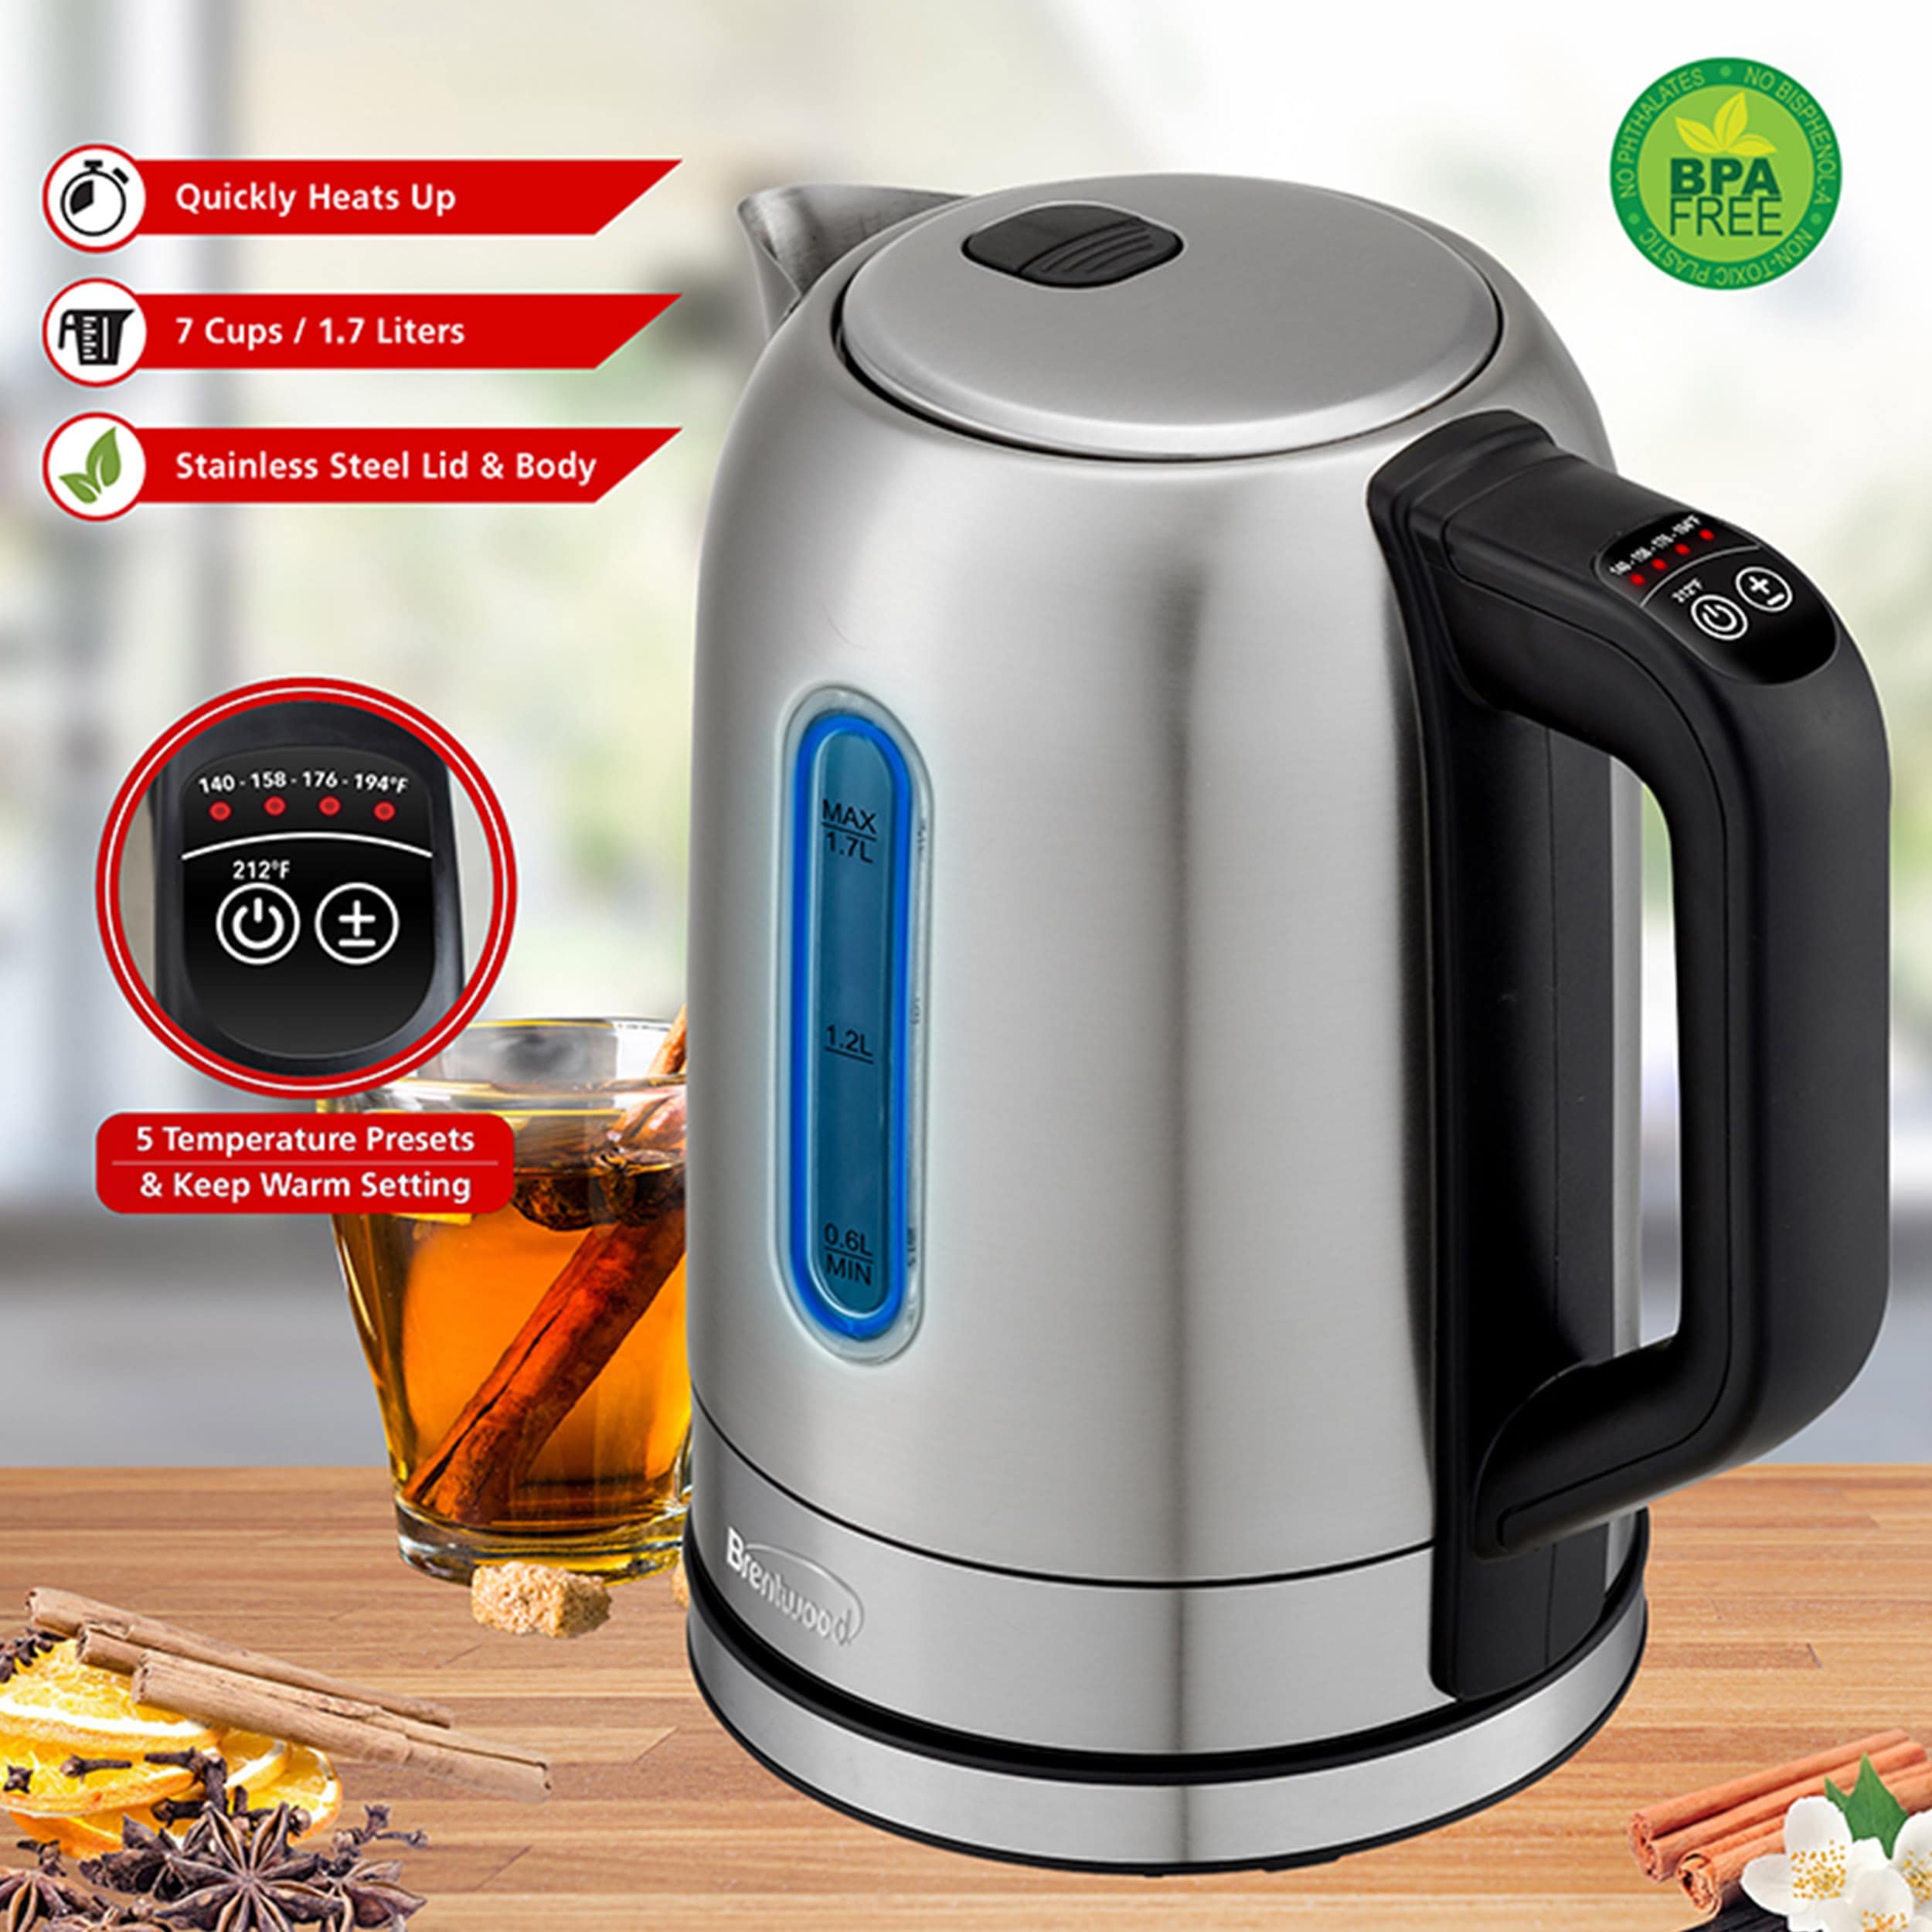 https://ak1.ostkcdn.com/images/products/is/images/direct/999733eafa9e8b24396433a95beeb510b3bd4c17/Stainless-Steel-7.2-Cup-Electric-Kettle-with-5-Presets.jpg